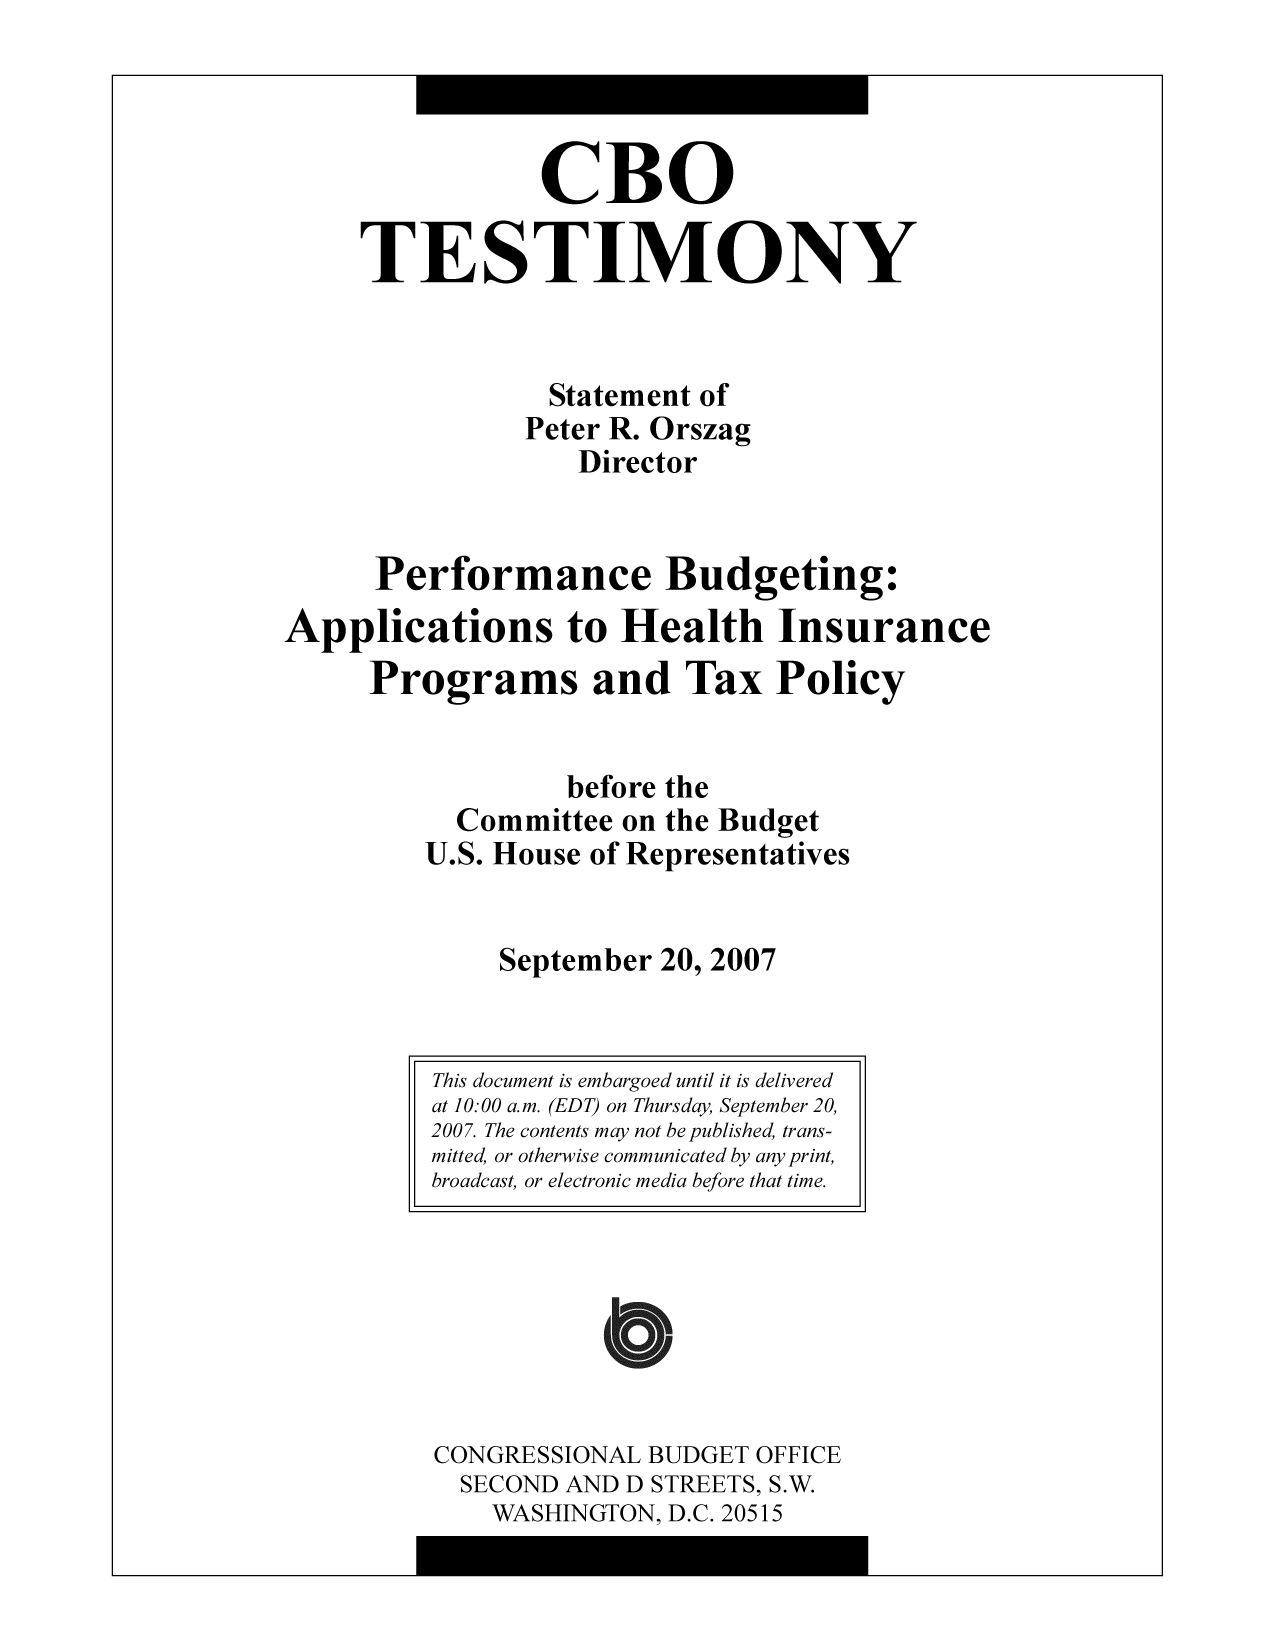 handle is hein.congrec/cbo10336 and id is 1 raw text is: CBO
TESTIMONY
Statement of
Peter R. Orszag
Director
Performance Budgeting:
Applications to Health Insurance
Programs and Tax Policy
before the
Committee on the Budget
U.S. House of Representatives
September 20, 2007

CONGRESSIONAL BUDGET OFFICE
SECOND AND D STREETS, S.W.
WASHINGTON, D.C. 20515

This document is embargoed until it is delivered
at 10:00 a.m. (EDT) on Thursday, September 20,
2007. The contents may not be published, trans-
mitted, or otherwise communicated by any print,
broadcast, or electronic media before that time.


